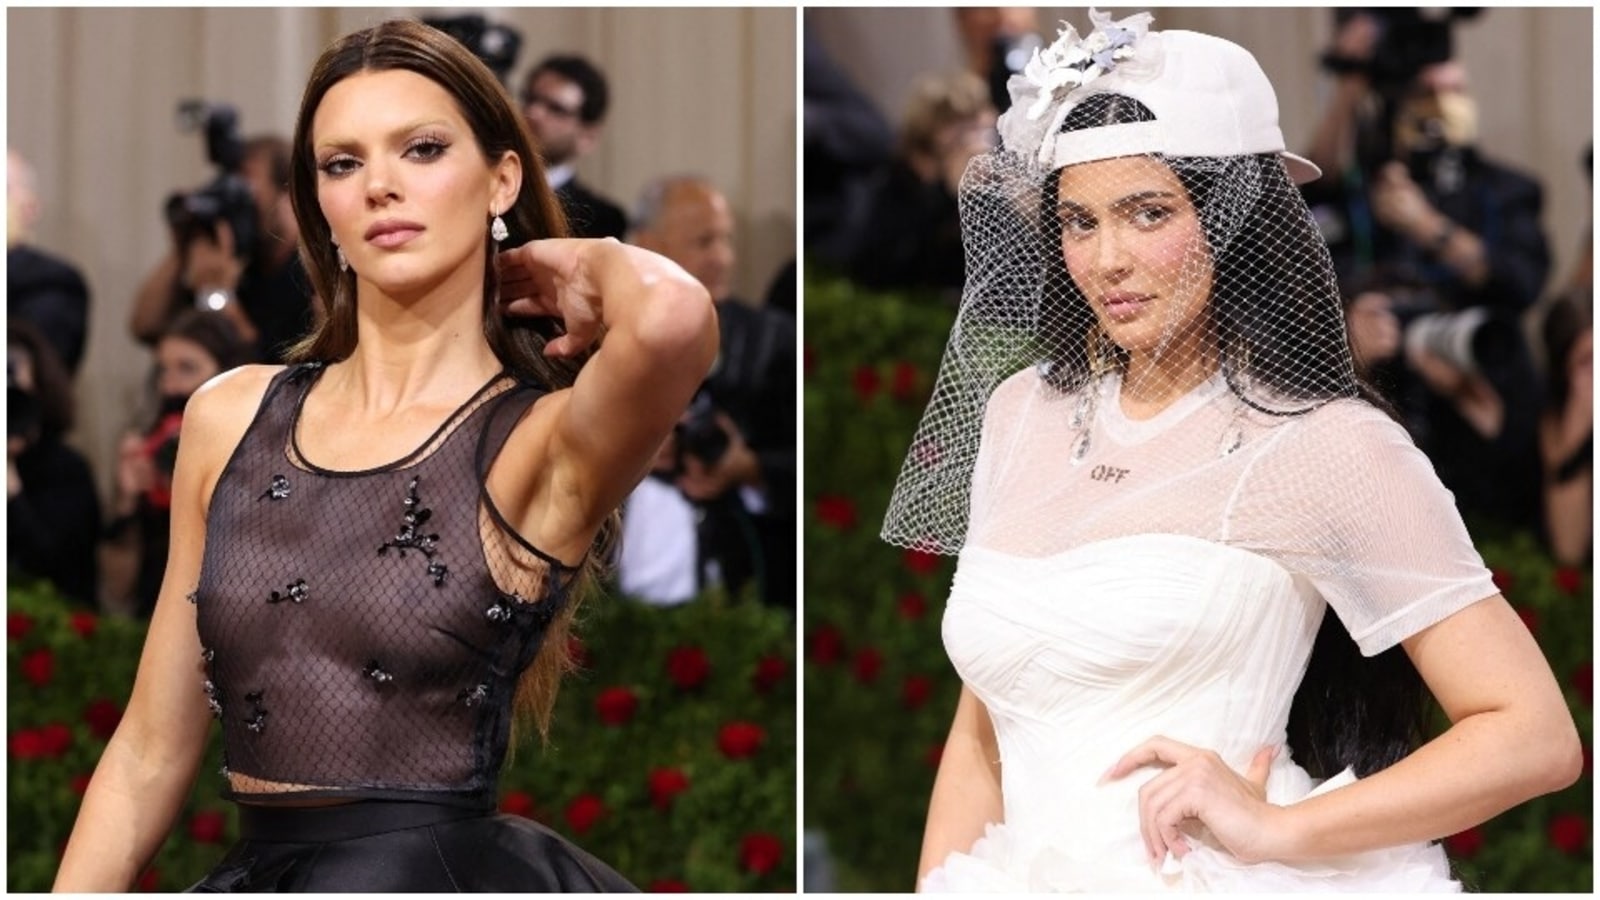 Met Gala 2022: Kendall Jenner with bleached brows, Kylie Jenner in wedding  dress